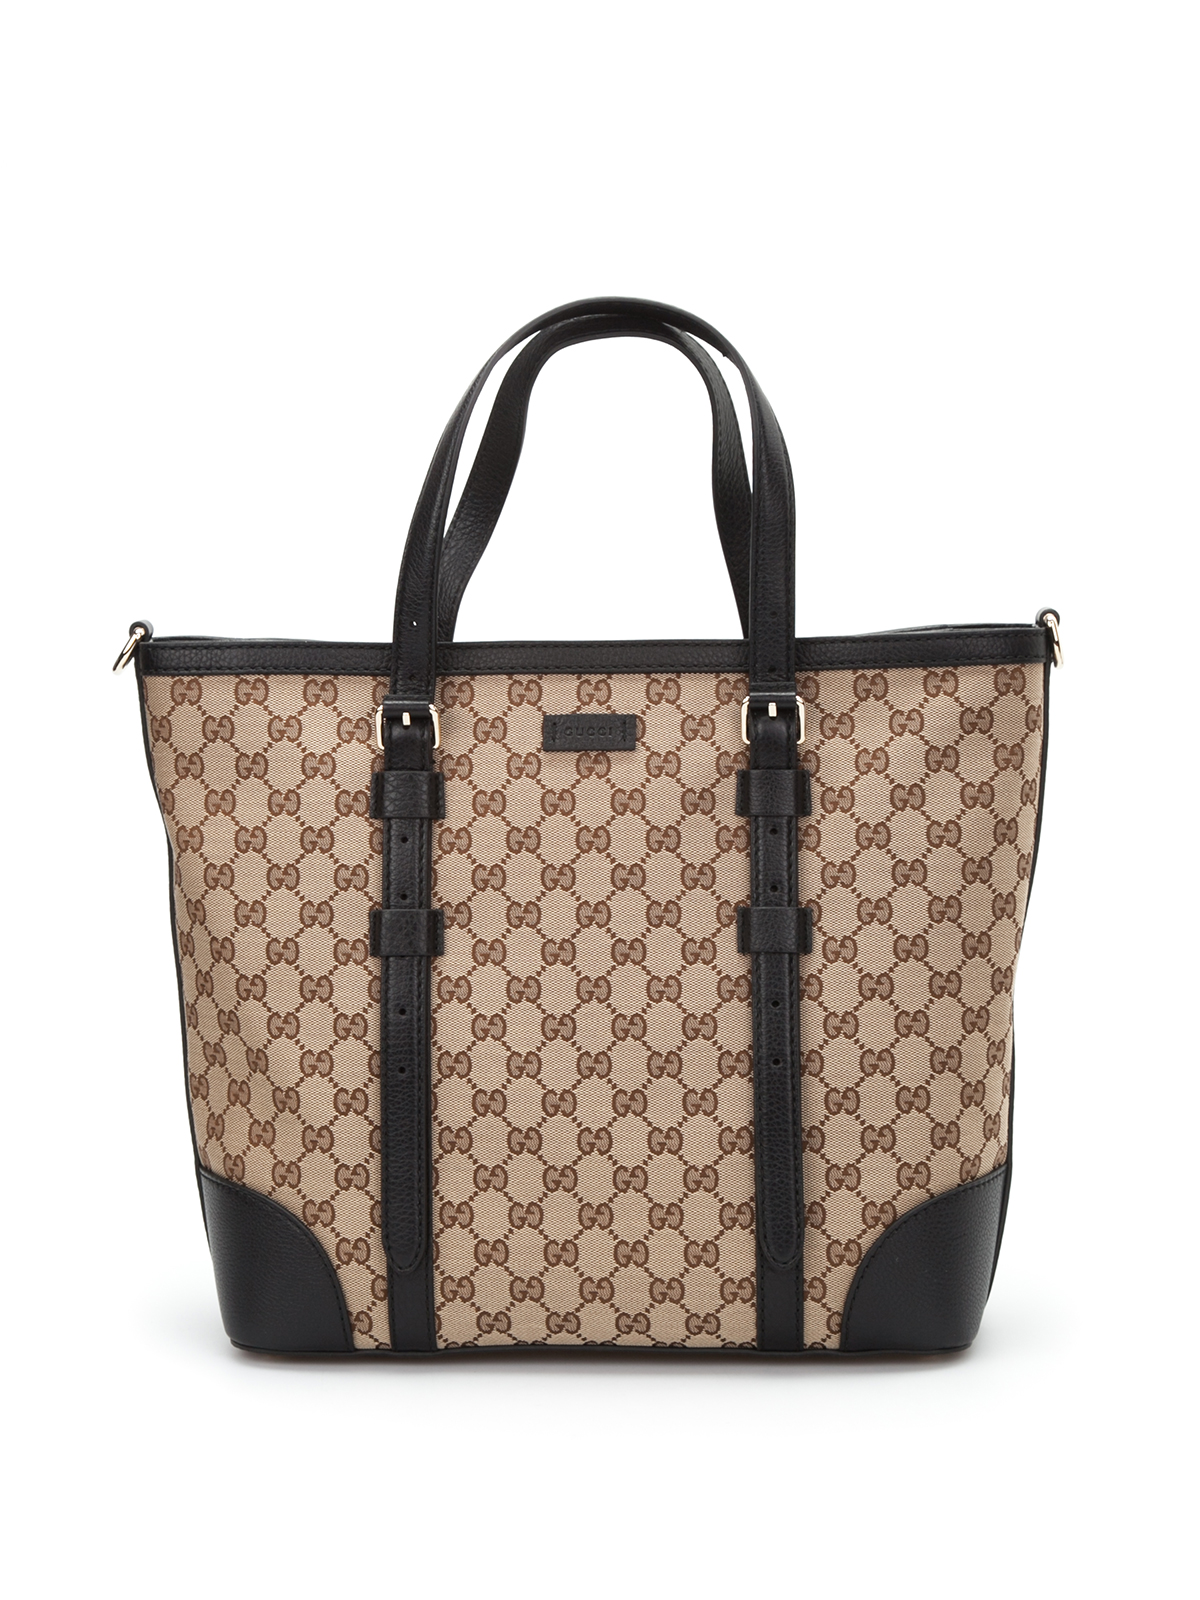 Gucci - GG classic tote - totes bags - 387602KQW1G9769 | www.bagssaleusa.com/product-category/neverfull-bag/